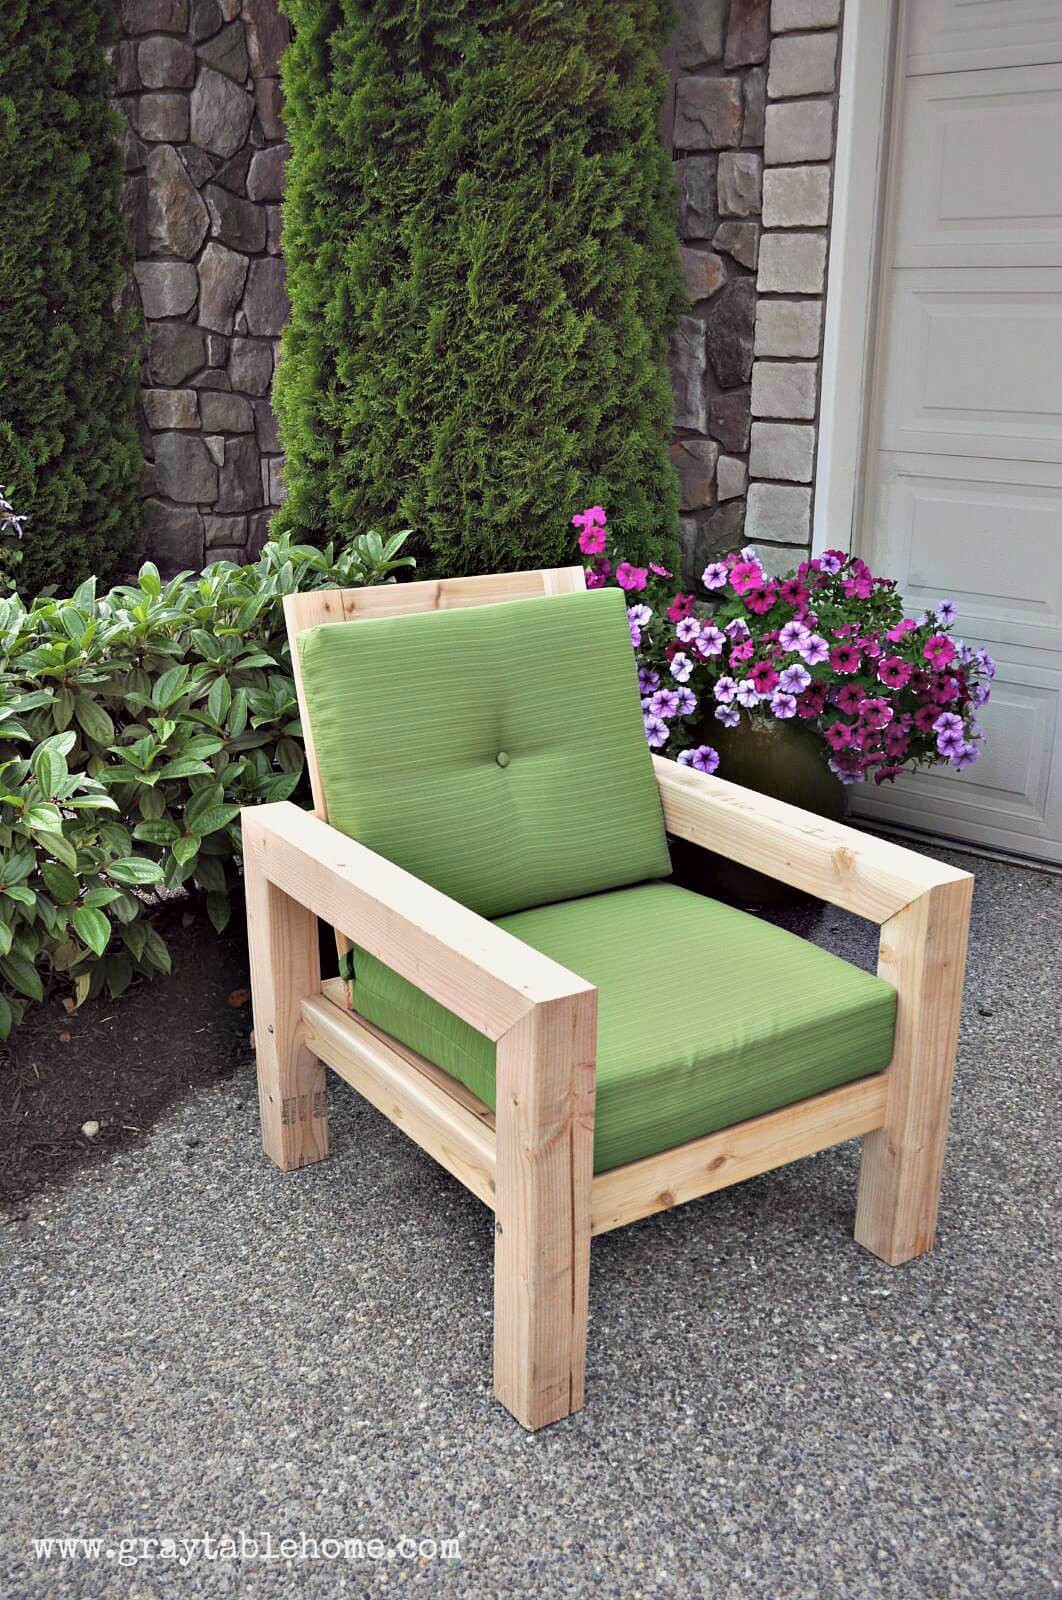 DIY Wooden Outdoor Furniture
 29 Best DIY Outdoor Furniture Projects Ideas and Designs